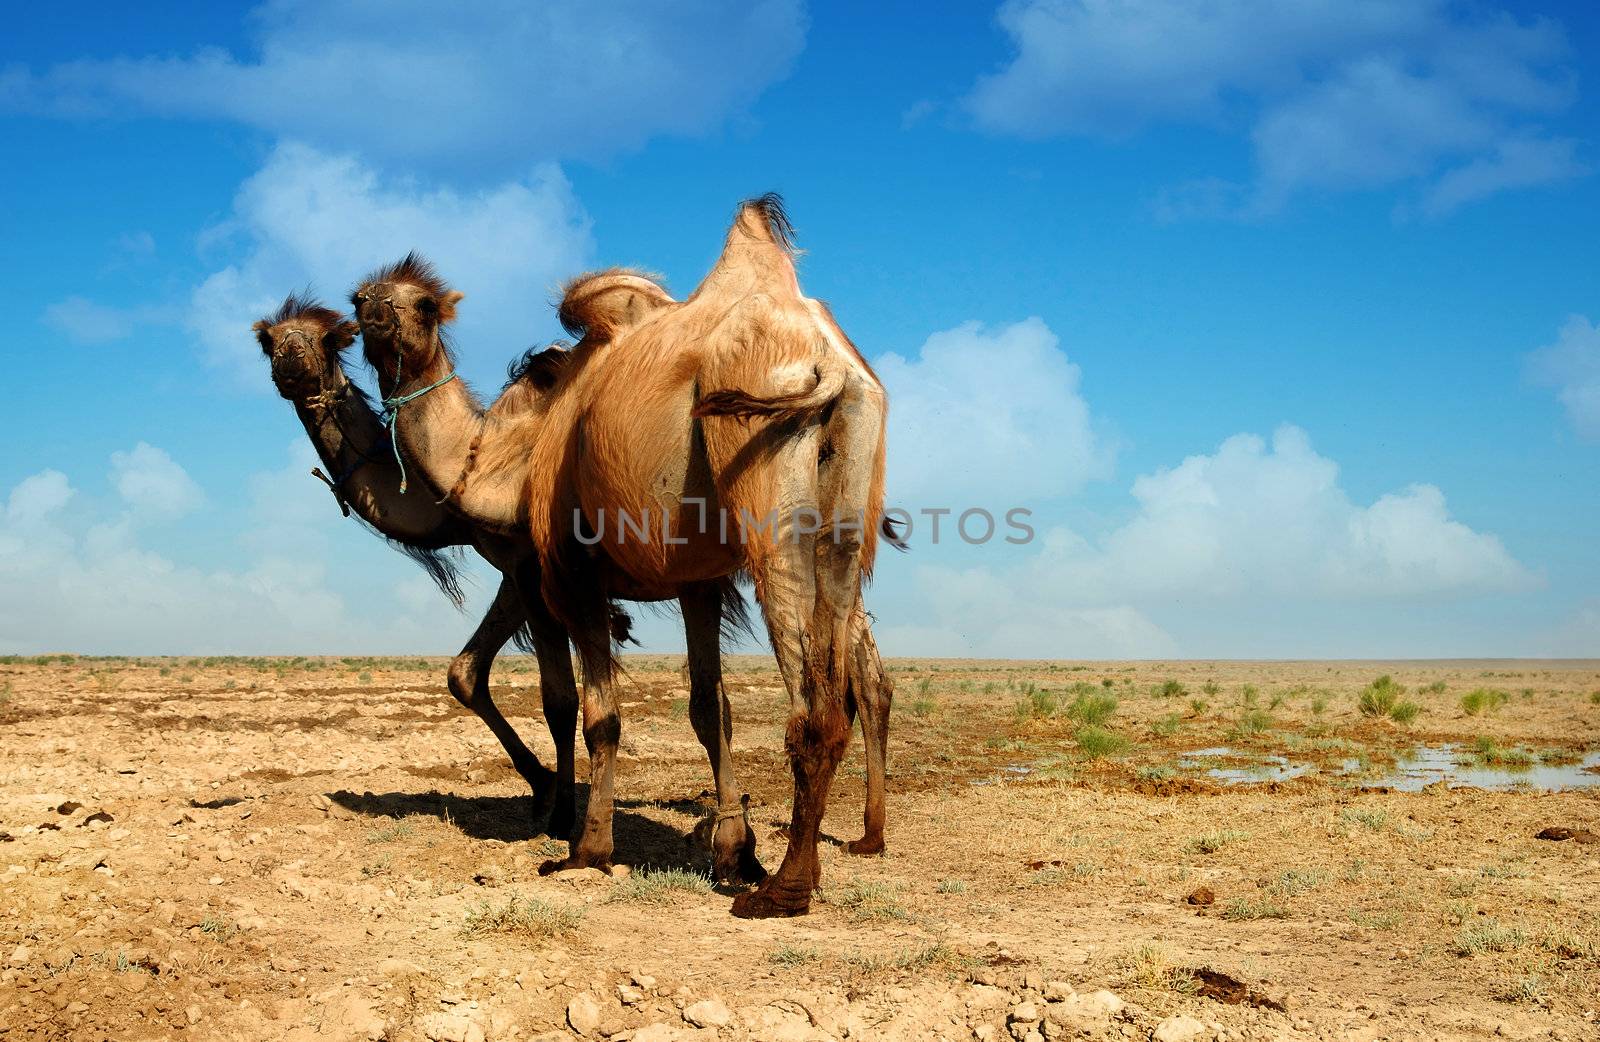 Candid photo of two camels standing in the desert